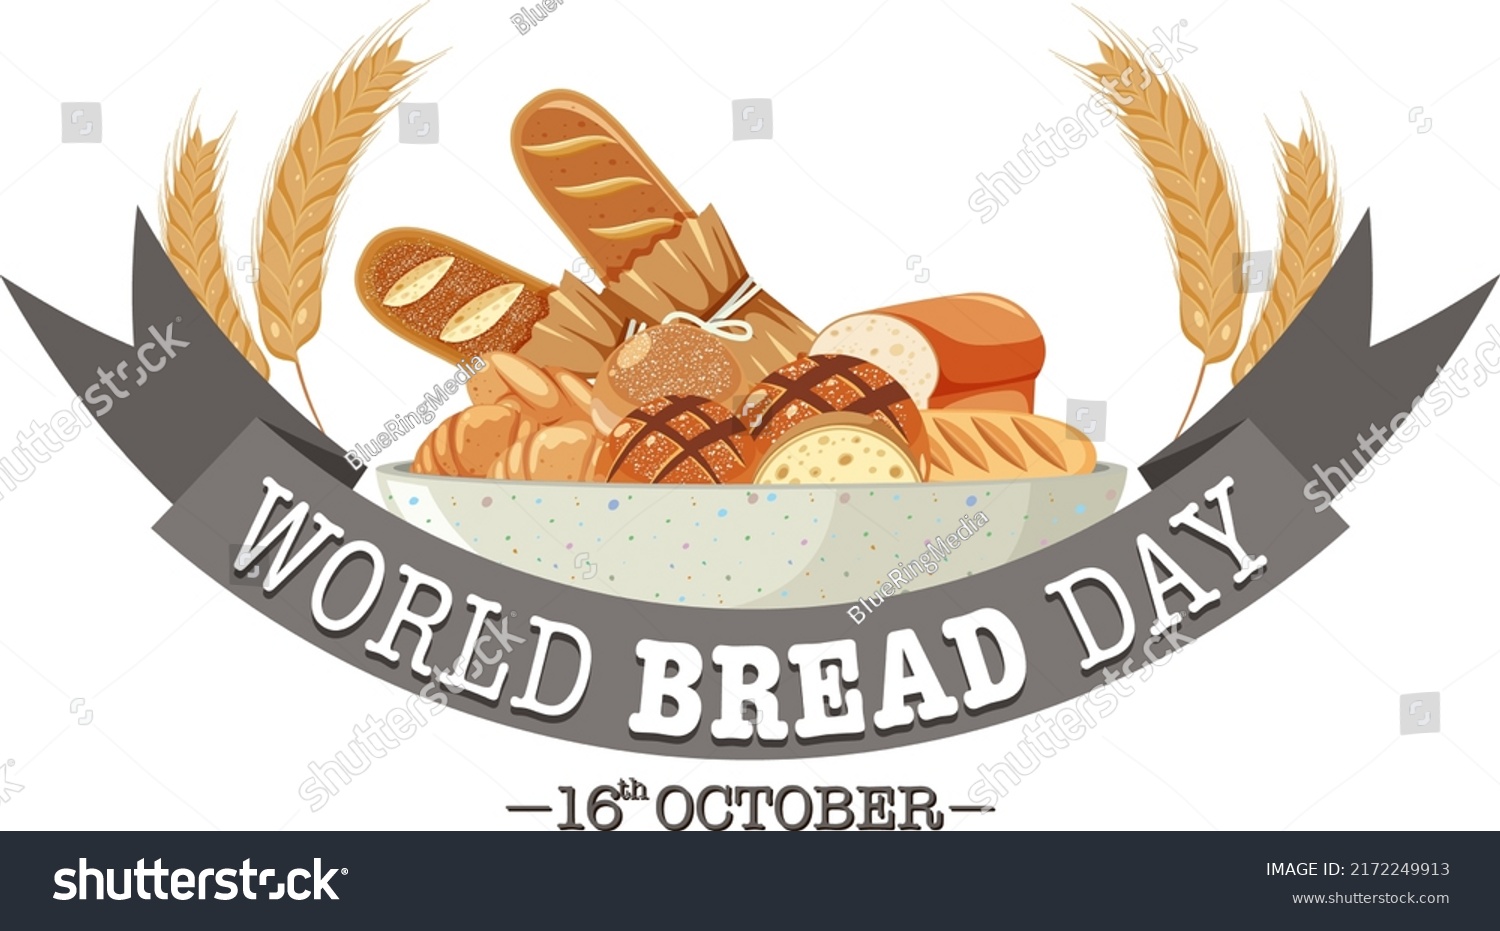 World Bread Day Poster Template Illustration Stock Vector Royalty Free 2172249913 Shutterstock 